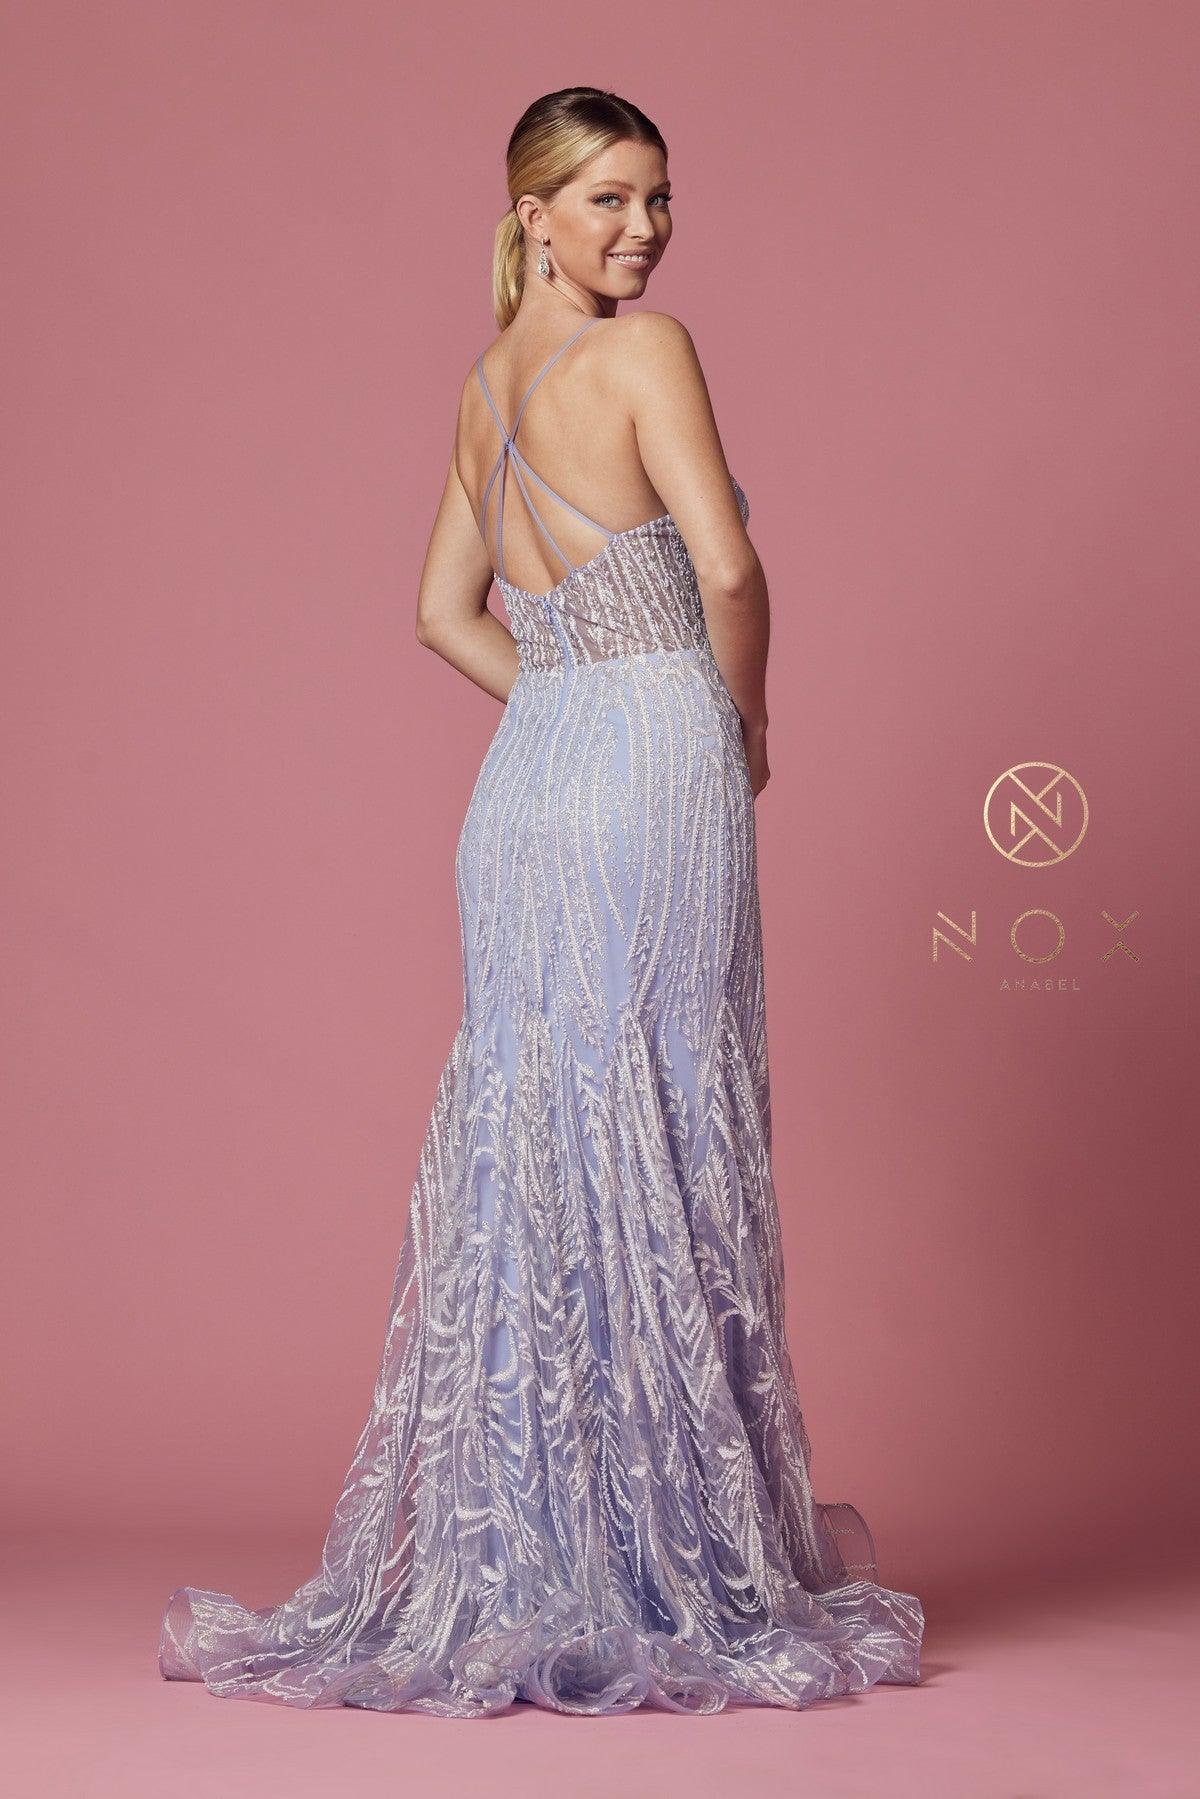 Spaghetti Strap Long Prom Dress - The Dress Outlet